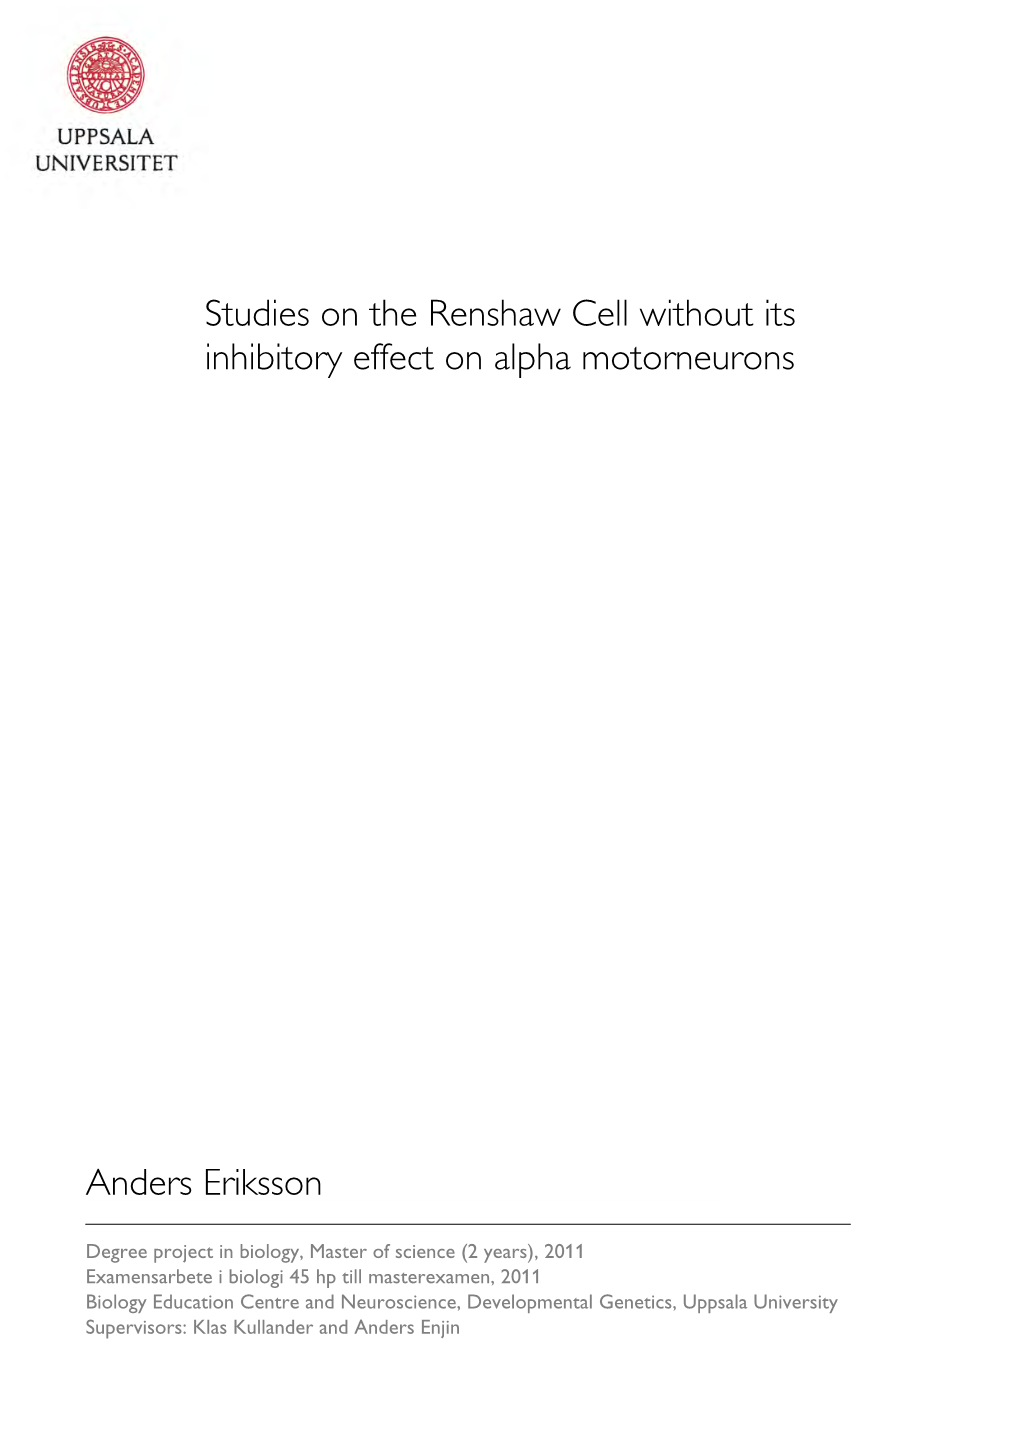 Studies on the Renshaw Cell Without Its Inhibitory Effect on Alpha Motorneurons